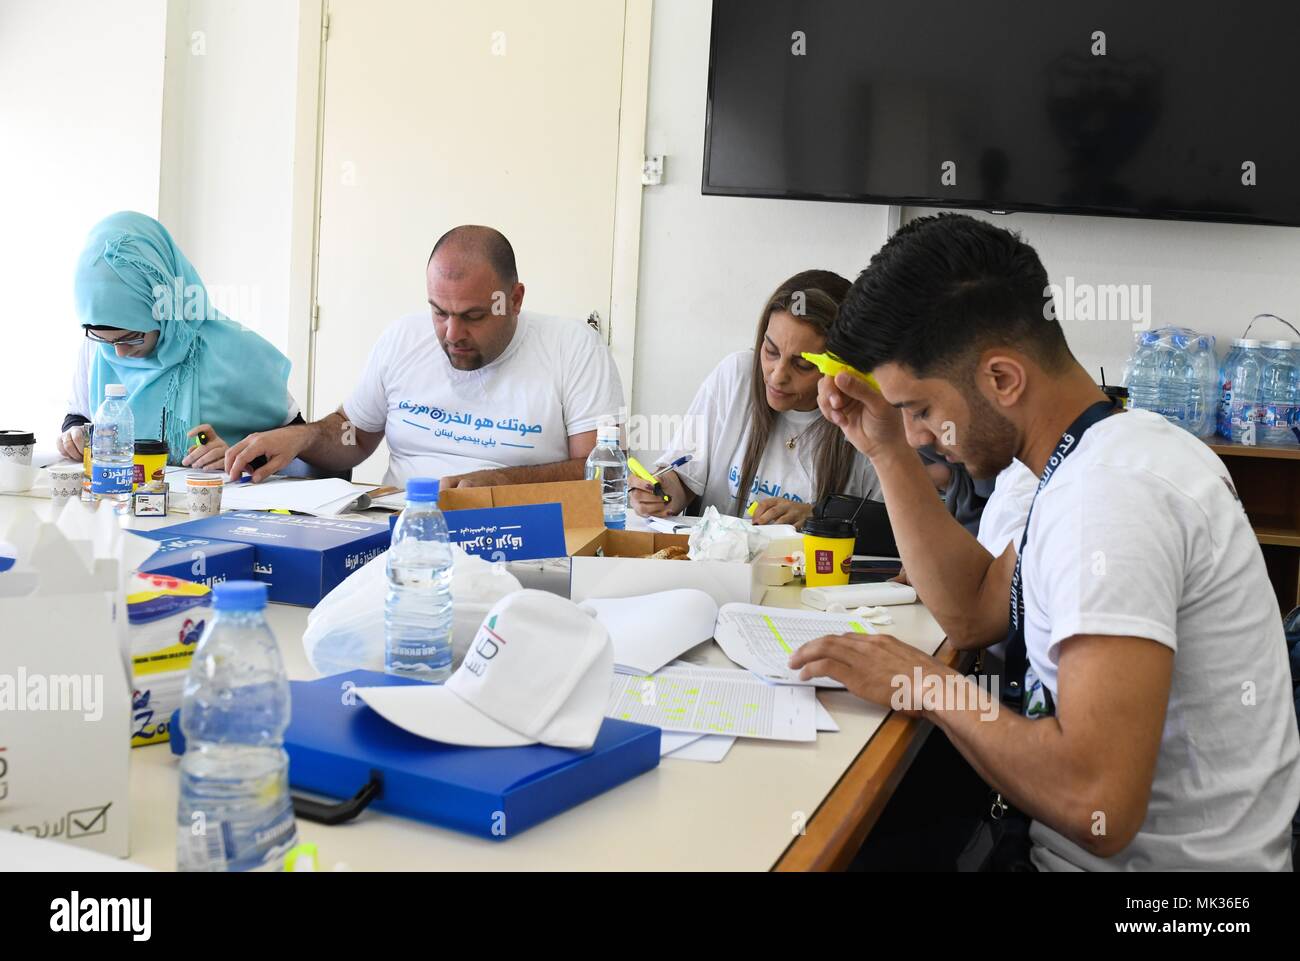 Saida, Lebanon. 6th May, 2018. Staff members work at a polling station in Saida, Lebanon, on May 6, 2018. Some 3.7 million Lebanese people are registered to cast their votes in the parliamentary elections on Sunday, the first of their kind since the adoption of a new law that allows proportional representation. Credit: Wu Huiwo/Xinhua/Alamy Live News Stock Photo